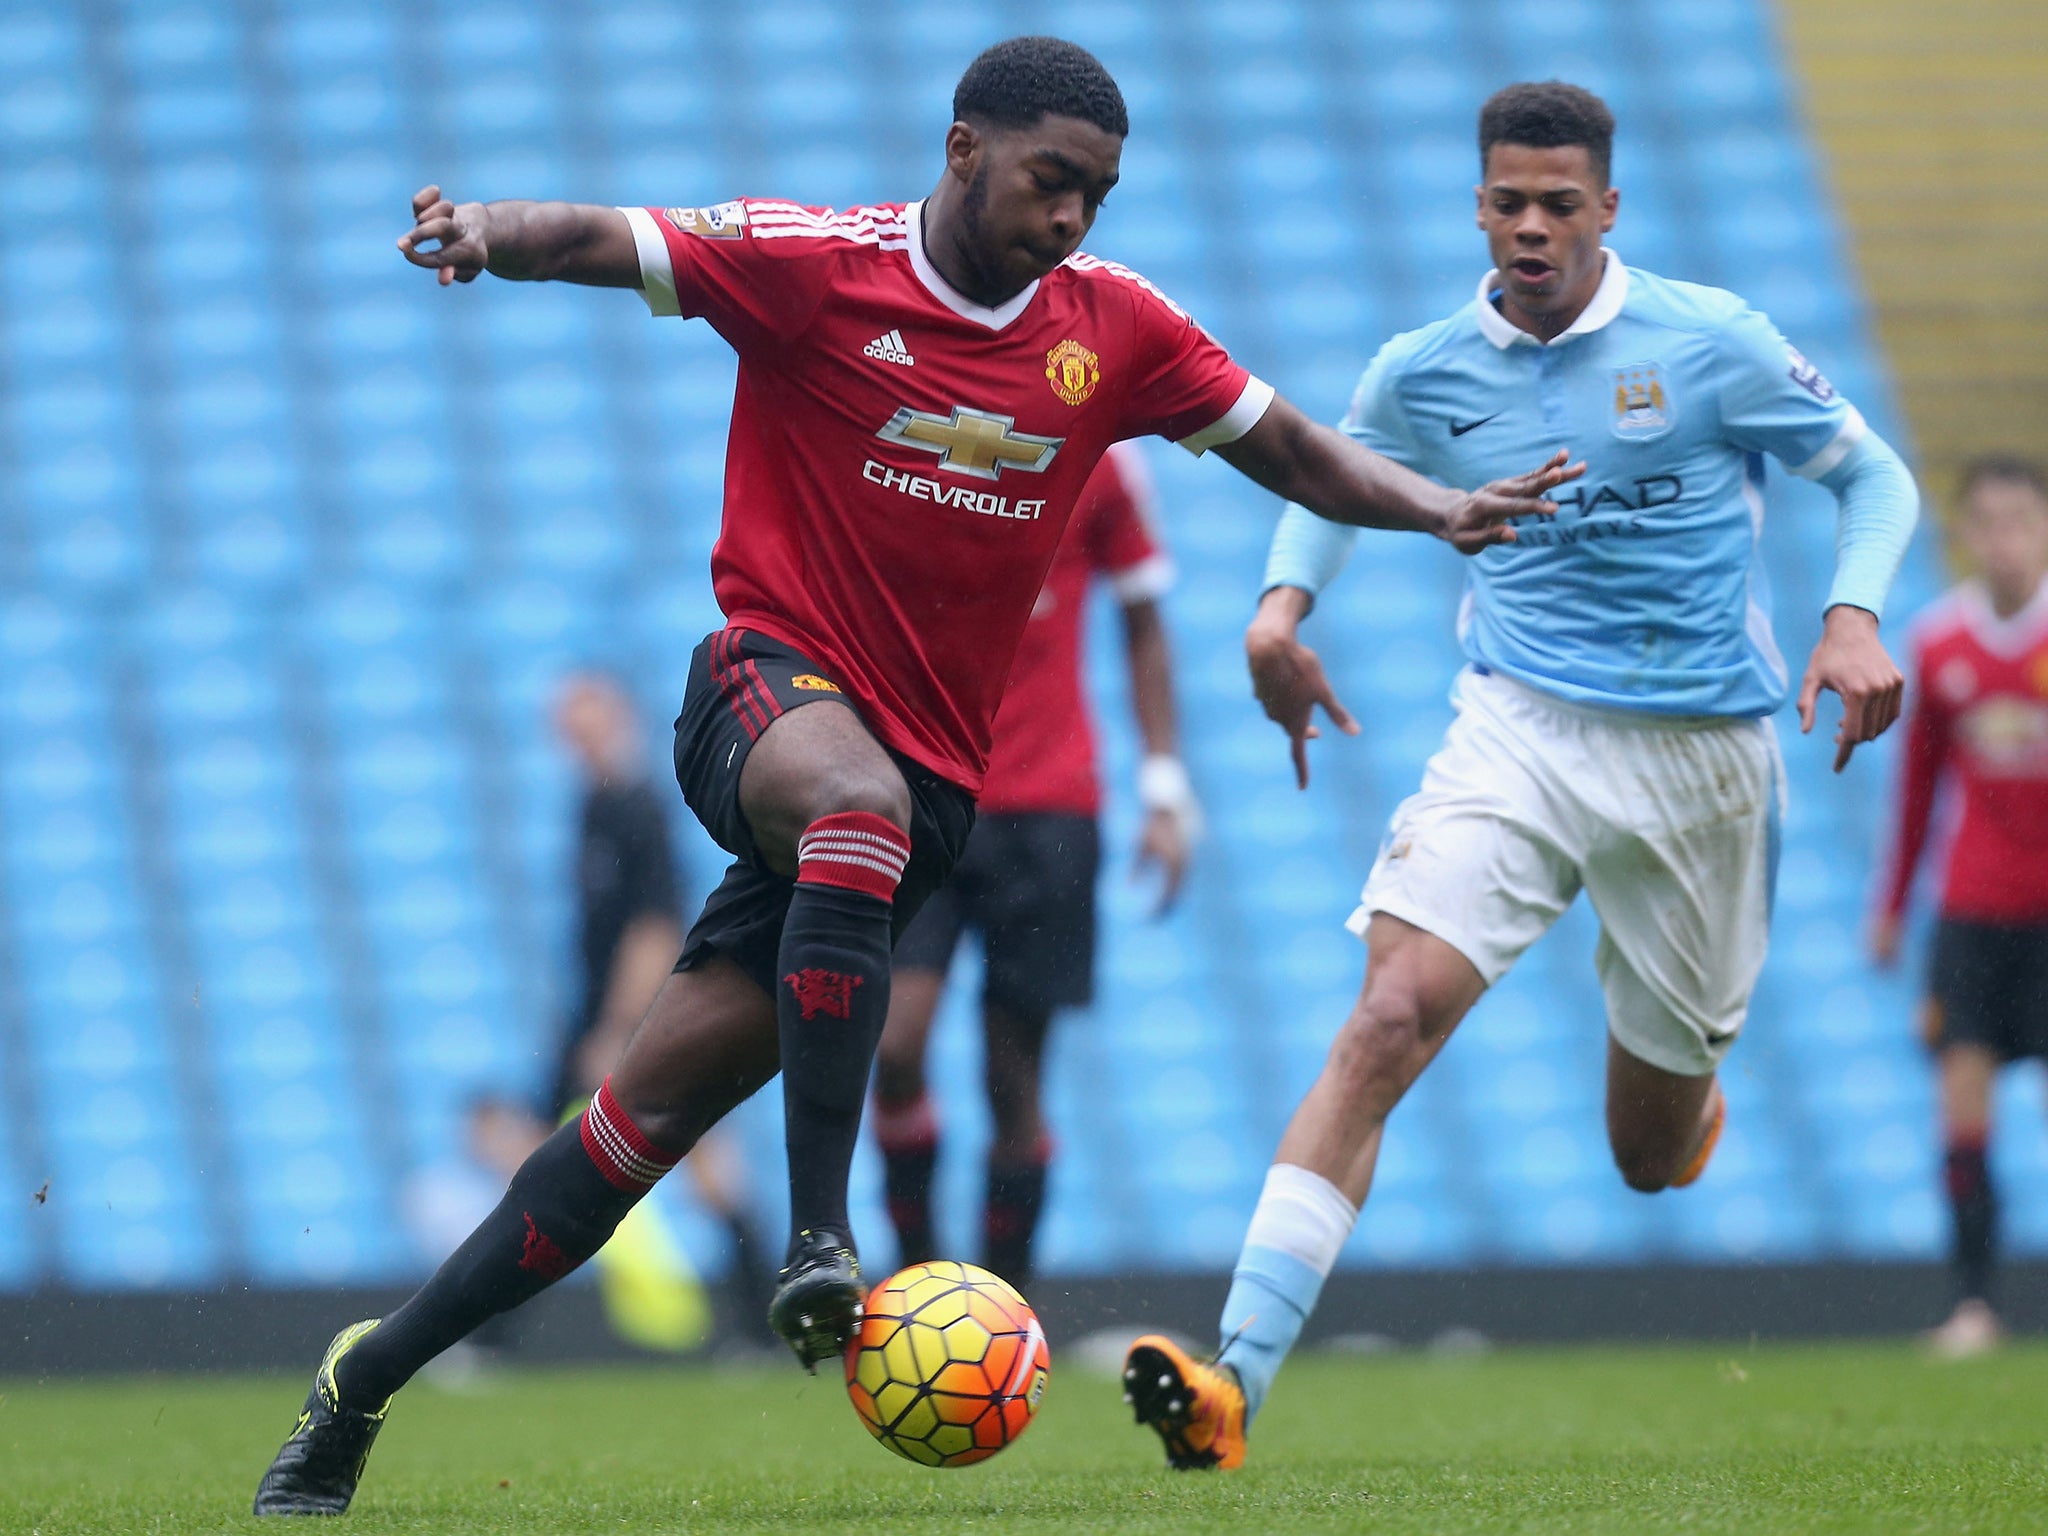 RoShaun Williams in action for Manchester United U-21s against Manchester City earlier this season